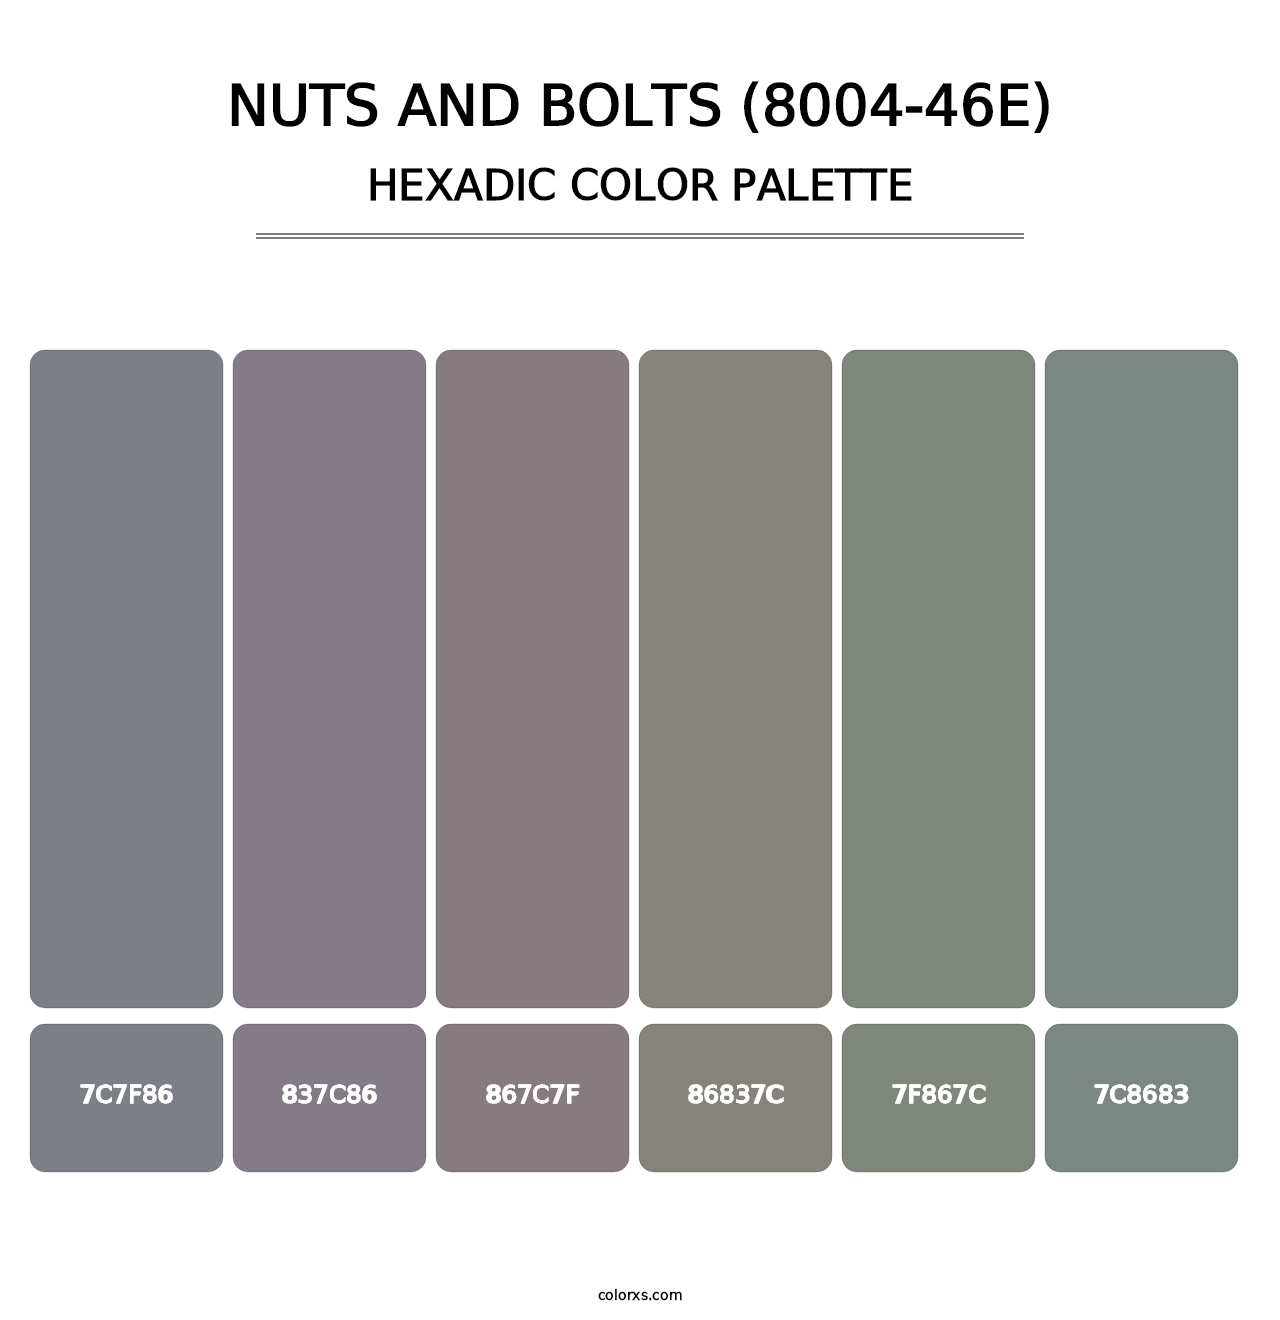 Nuts and Bolts (8004-46E) - Hexadic Color Palette